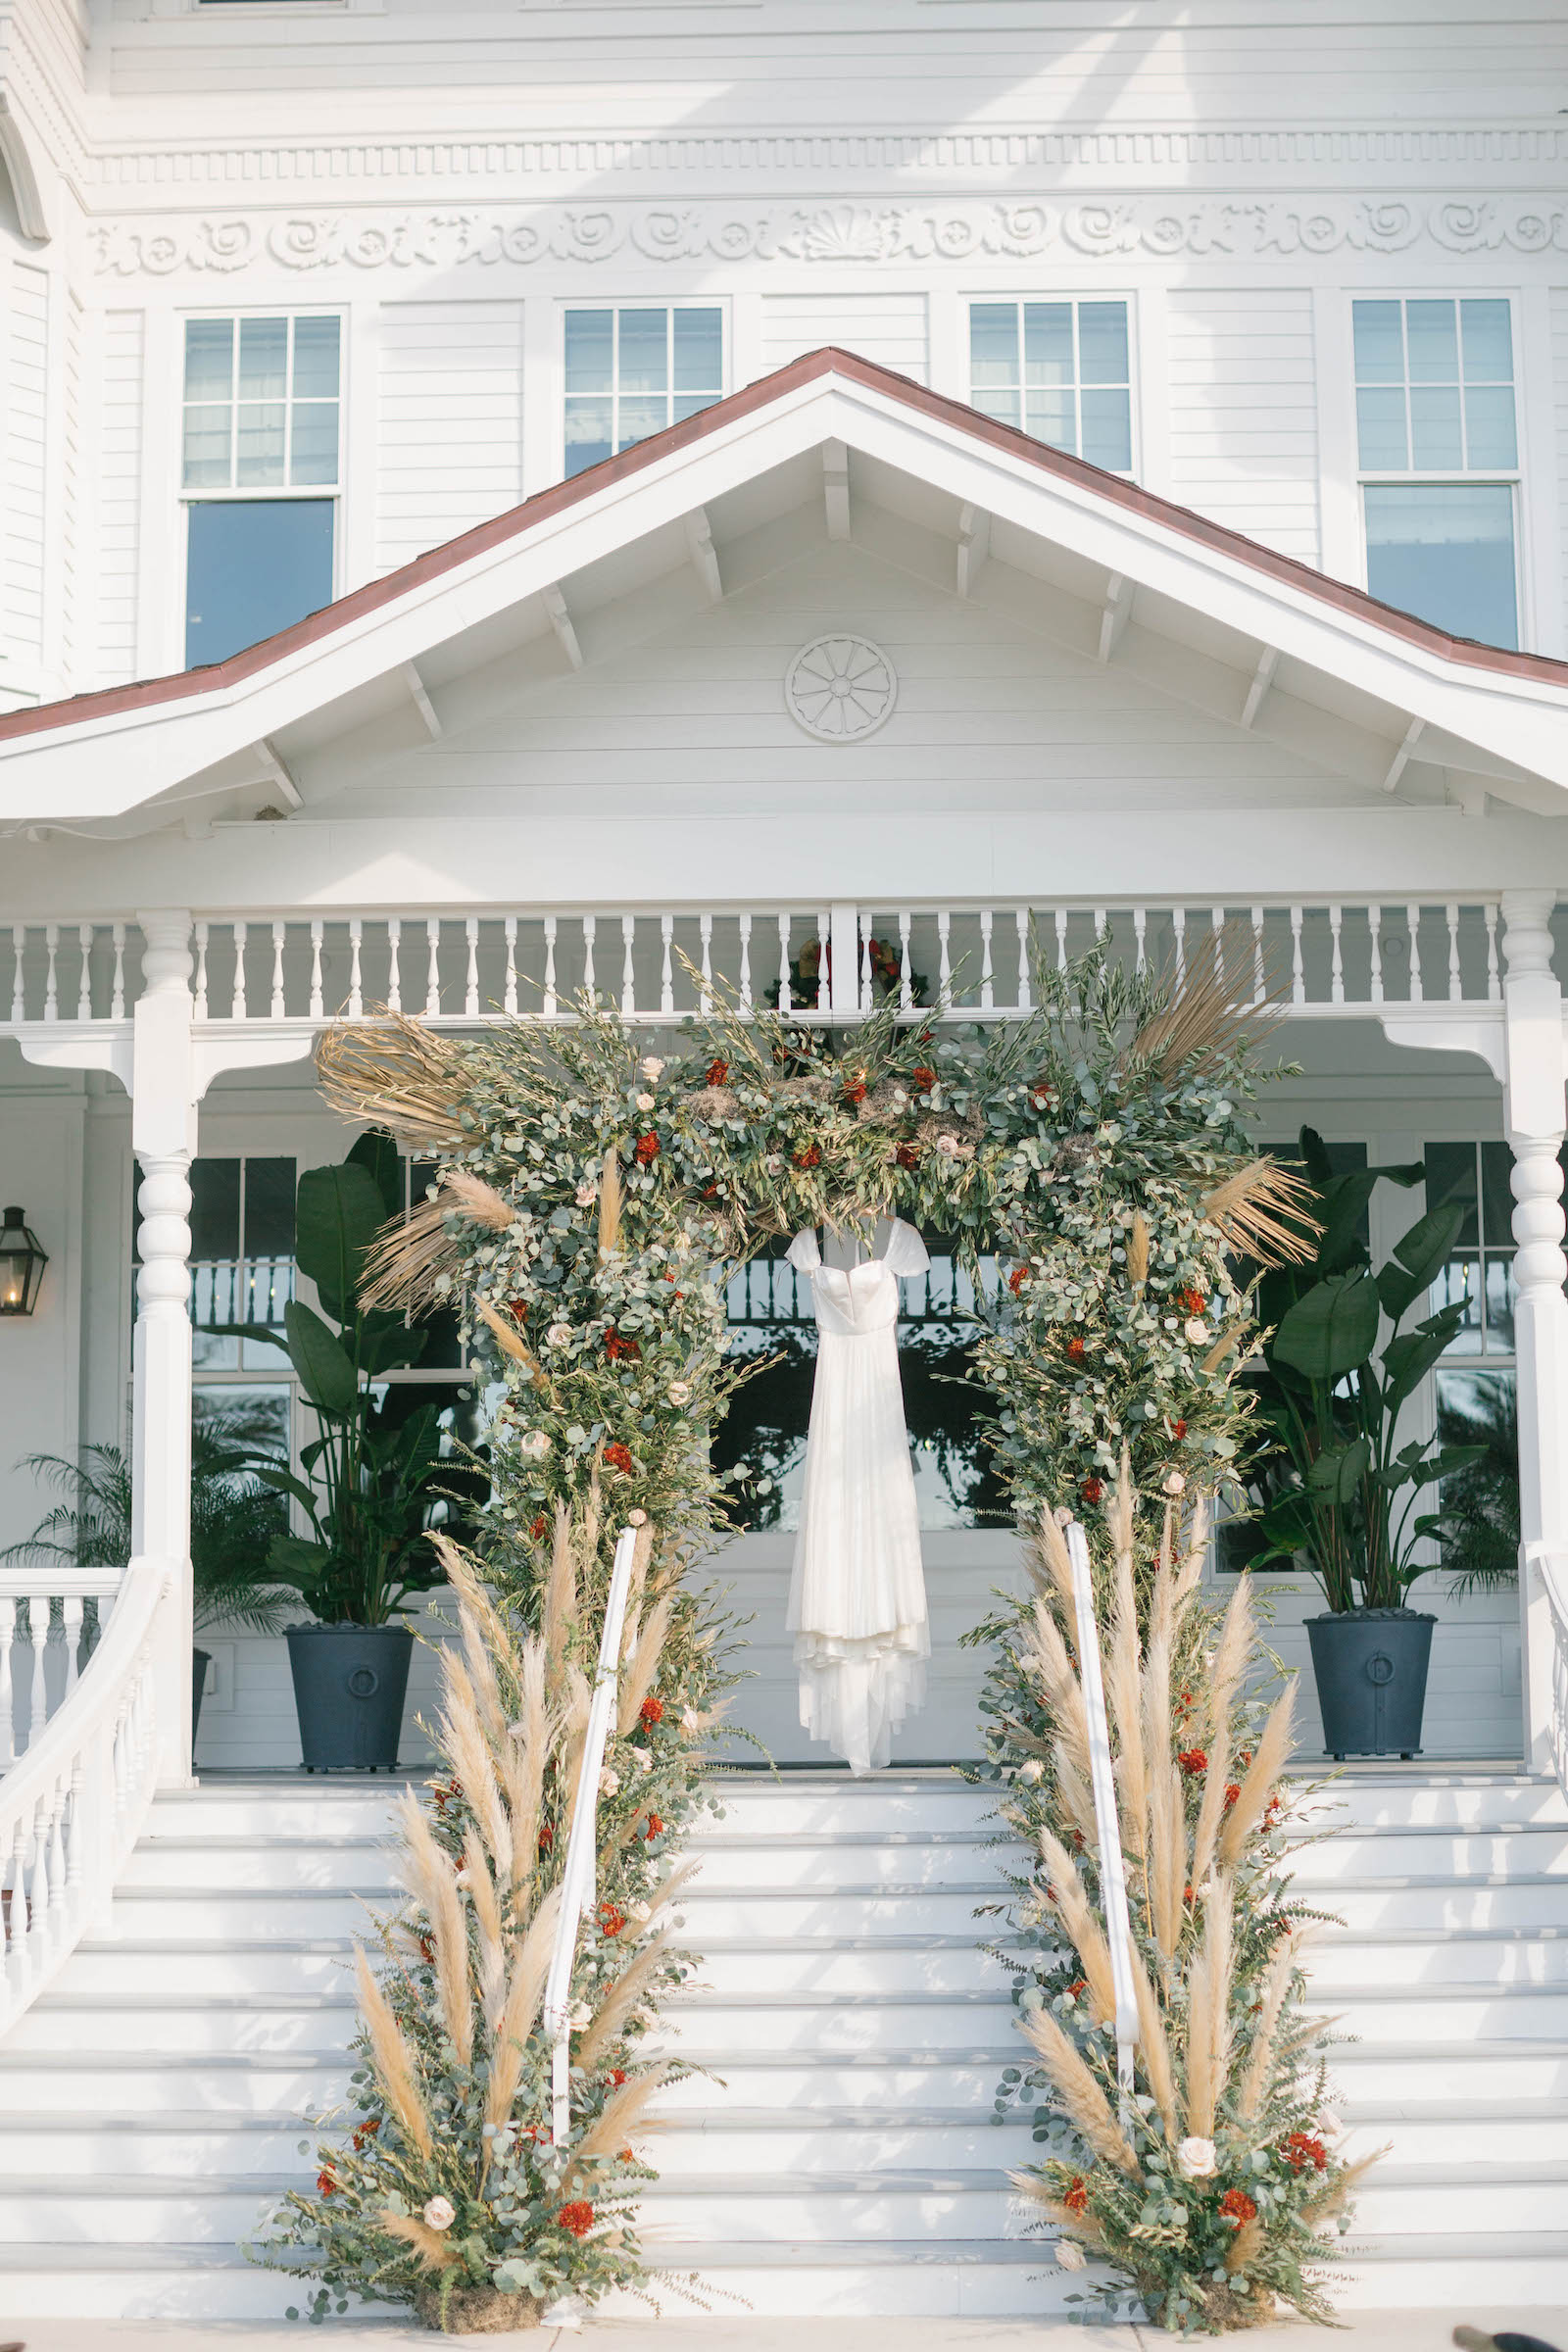 Boho Garden Wedding Ceremony, Wedding Dress Hanging On Lush Greenery and Floral Arch with Pampas Grass Arrangements, String Lights | Tampa Bay Wedding Planner Parties A'la Carte | Florida Wedding Venue Belleview Inn